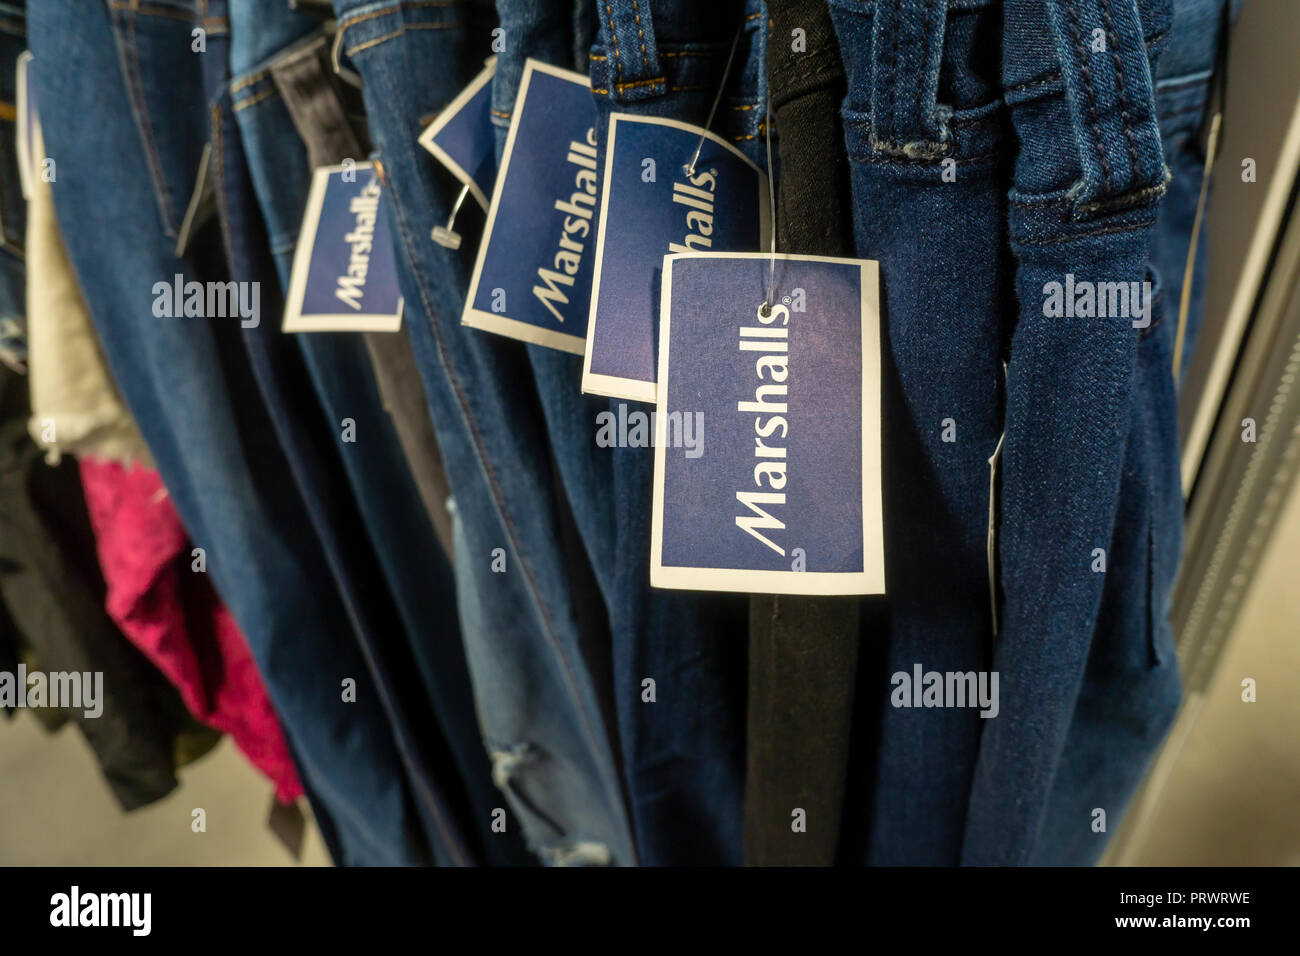 New York, USA. 4th October, 2018. Jeans in the brand new off-price Marshalls store in the Lower East Side neighborhood of in New York during it's grand opening on Thursday, October 4, 2018. Marshalls is a brand of the TJX Companies, parent of Marshalls, T. J. Maxx, HomeGoods and other brands. TJX Companies recently reported comps that grew 6% over year citing increased traffic in its Marmaxx division (Marshalls, TX Maxx). (Â© Richard B. Levine) Credit: Richard Levine/Alamy Live News Stock Photo